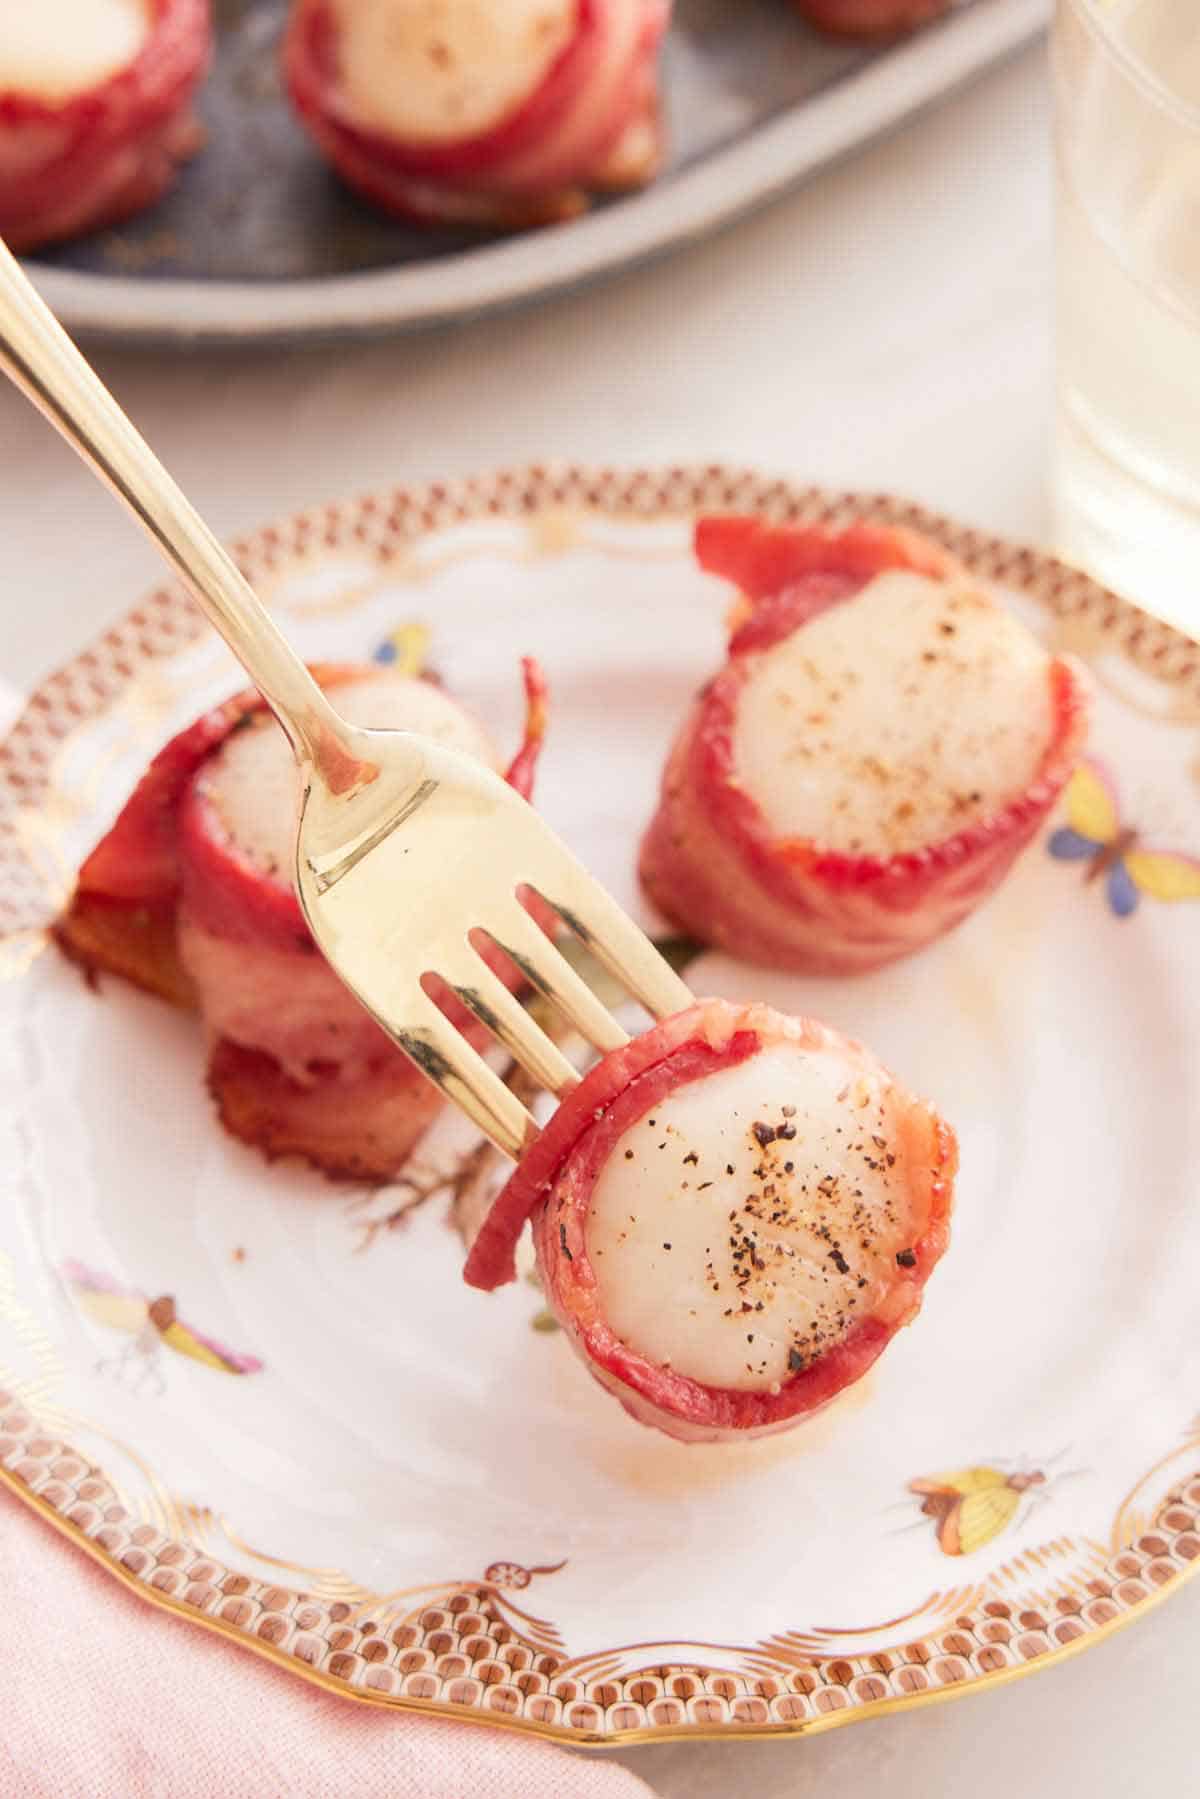 A fork lifting up a bacon wrapped scallop off a plate with two more.